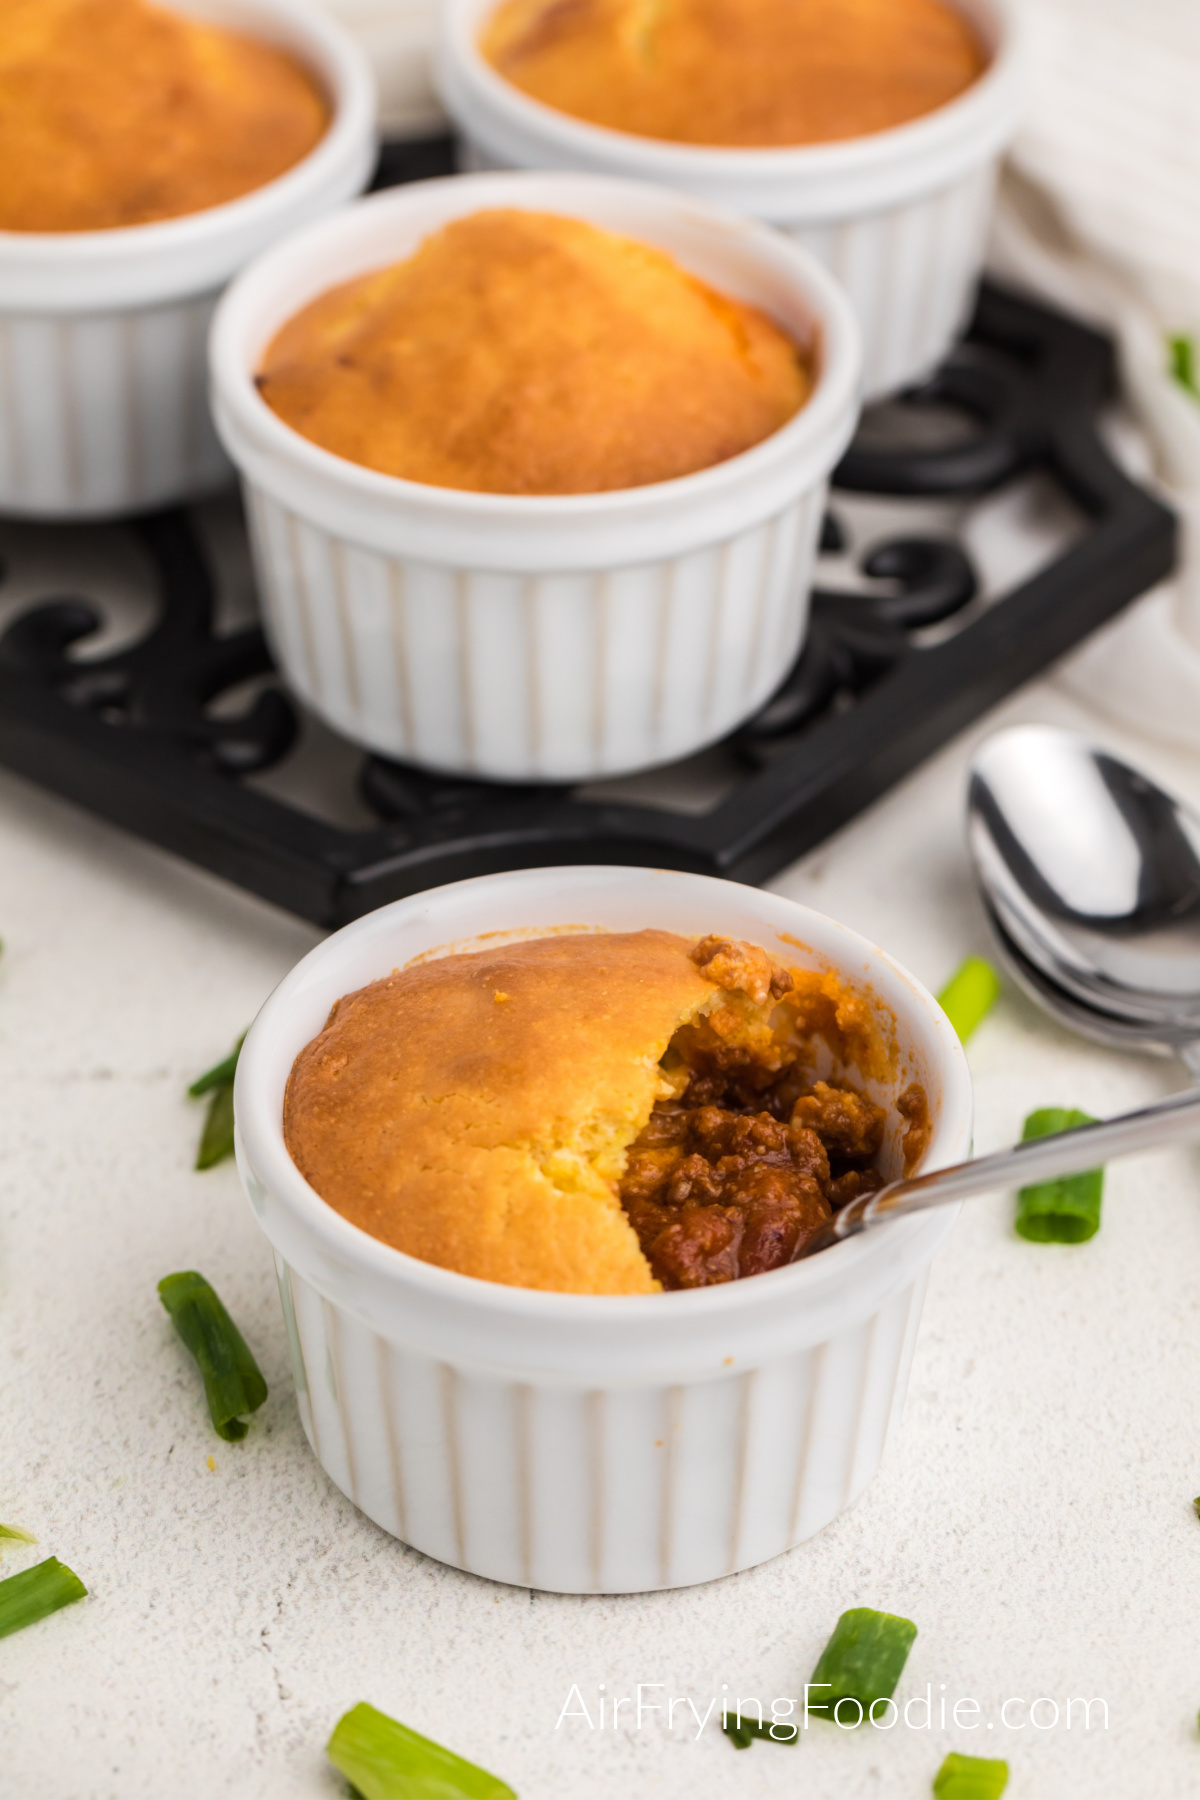 Chili pot pie made in the air fryer with a spoon inside, ready to eat.